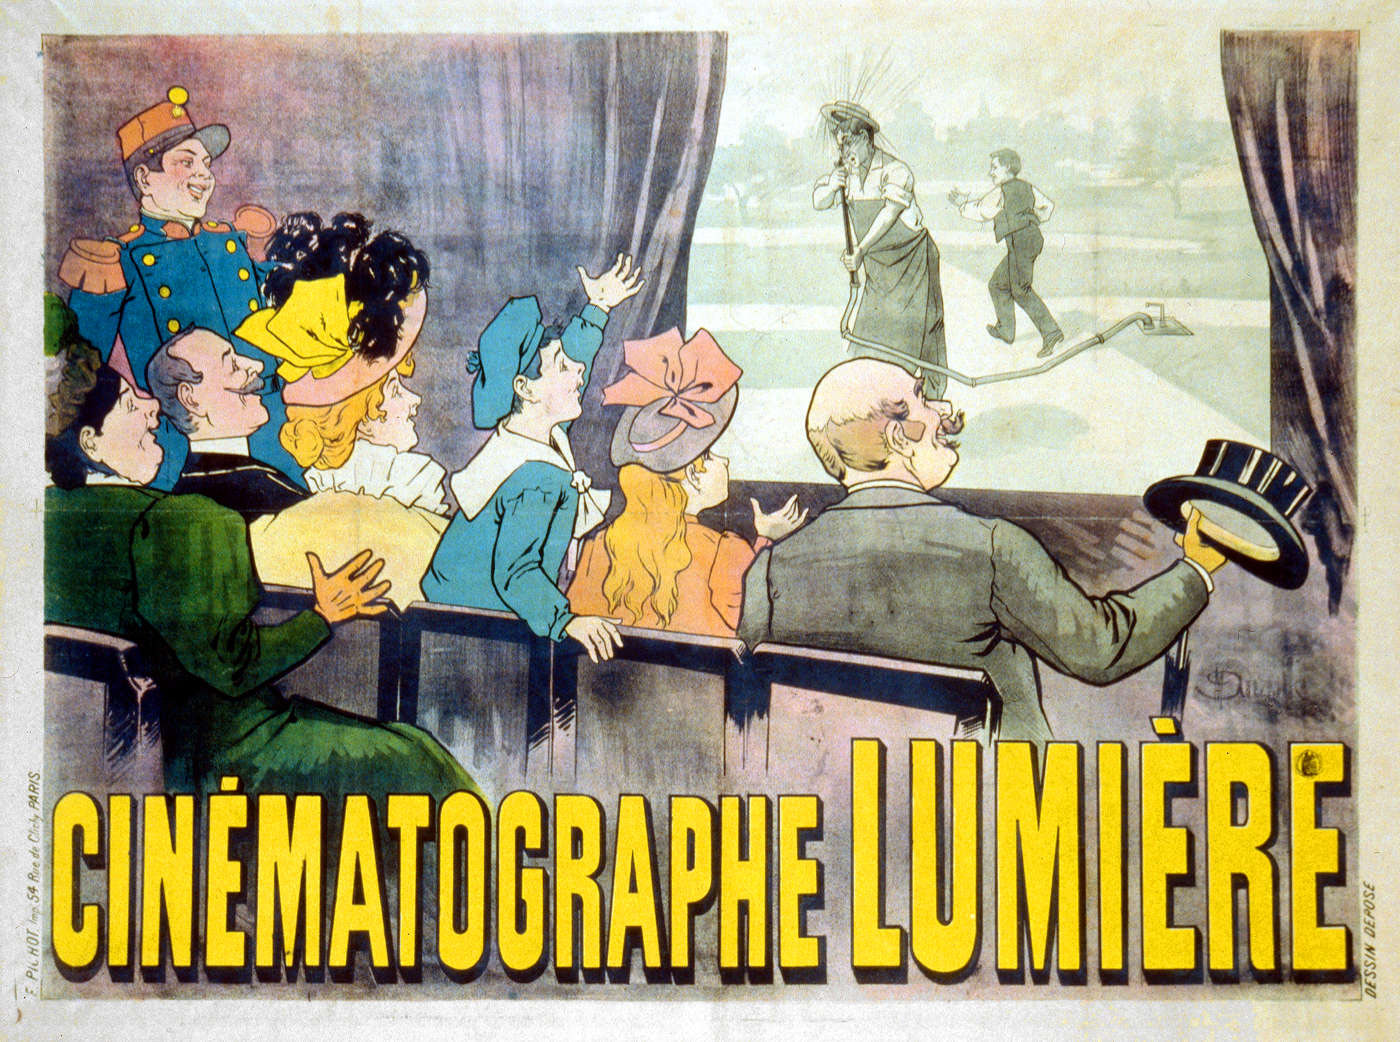 History of film and cinema from Lumiere in Europe to Edison in the USA